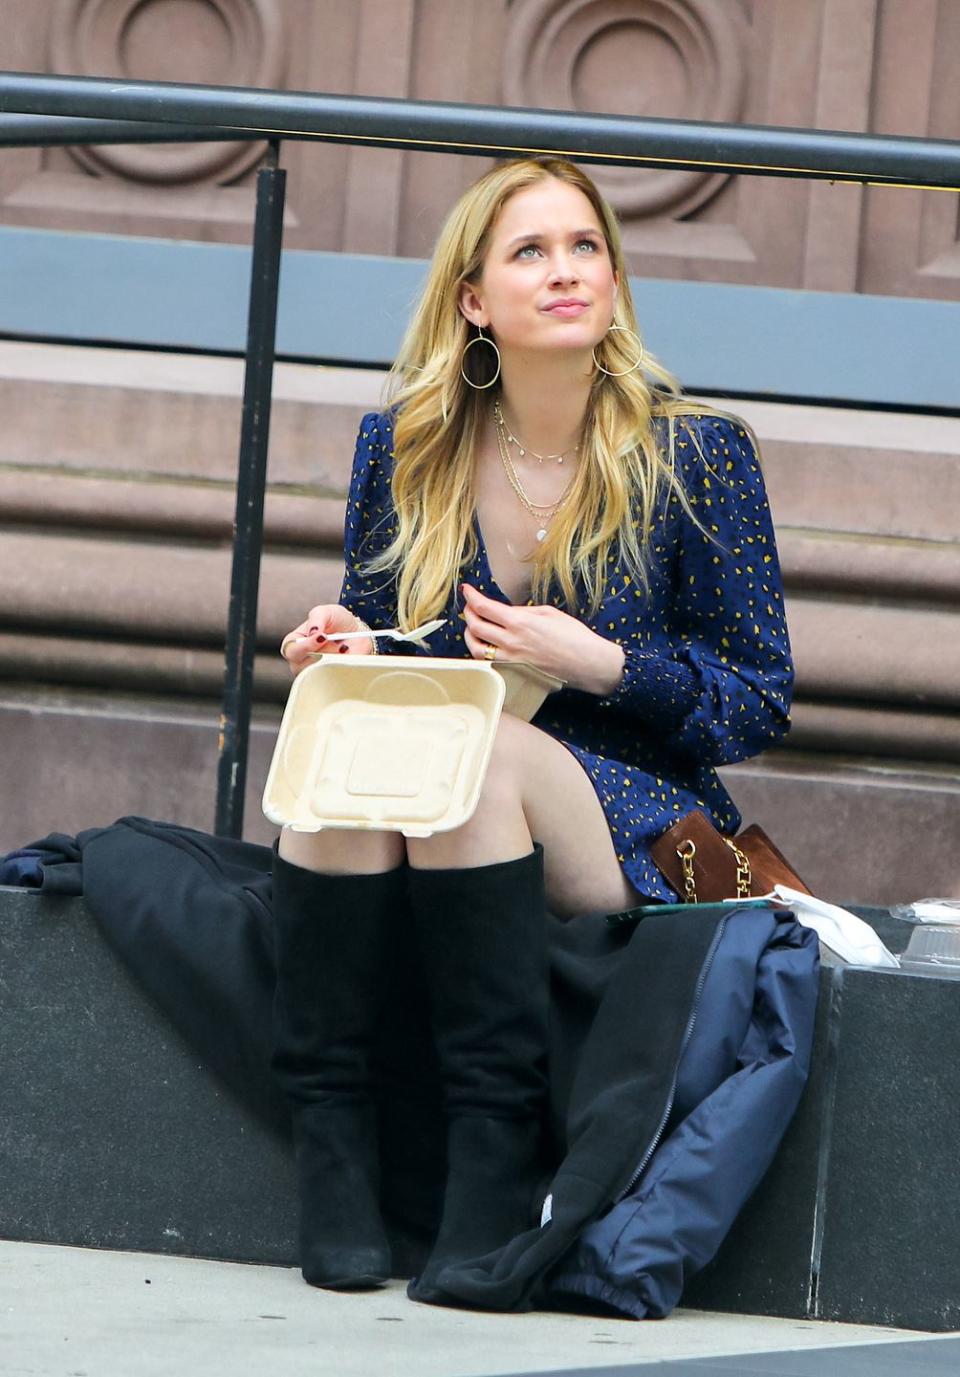 Every 'Gossip Girl' Reboot Behind-the-Scenes Photo You Need to See